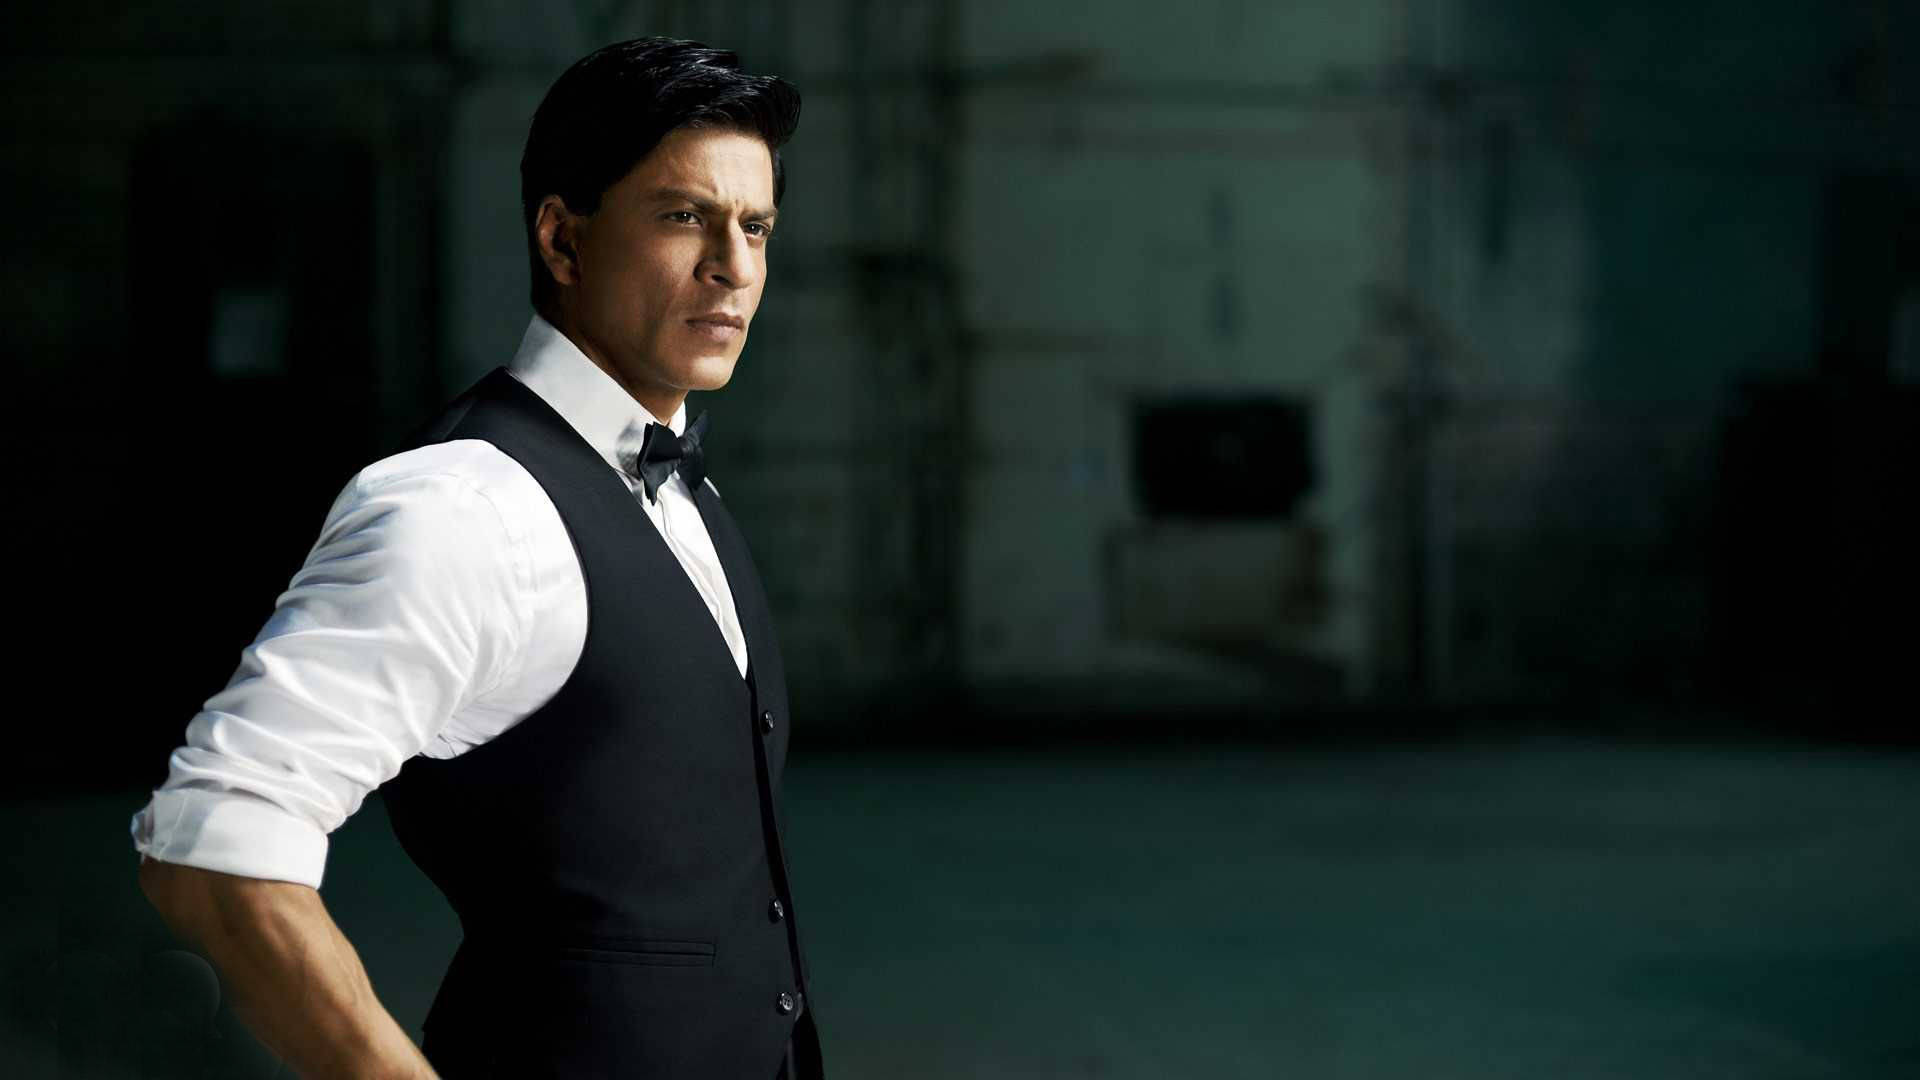 Shah Rukh Khan Gq Vest Outfit Background